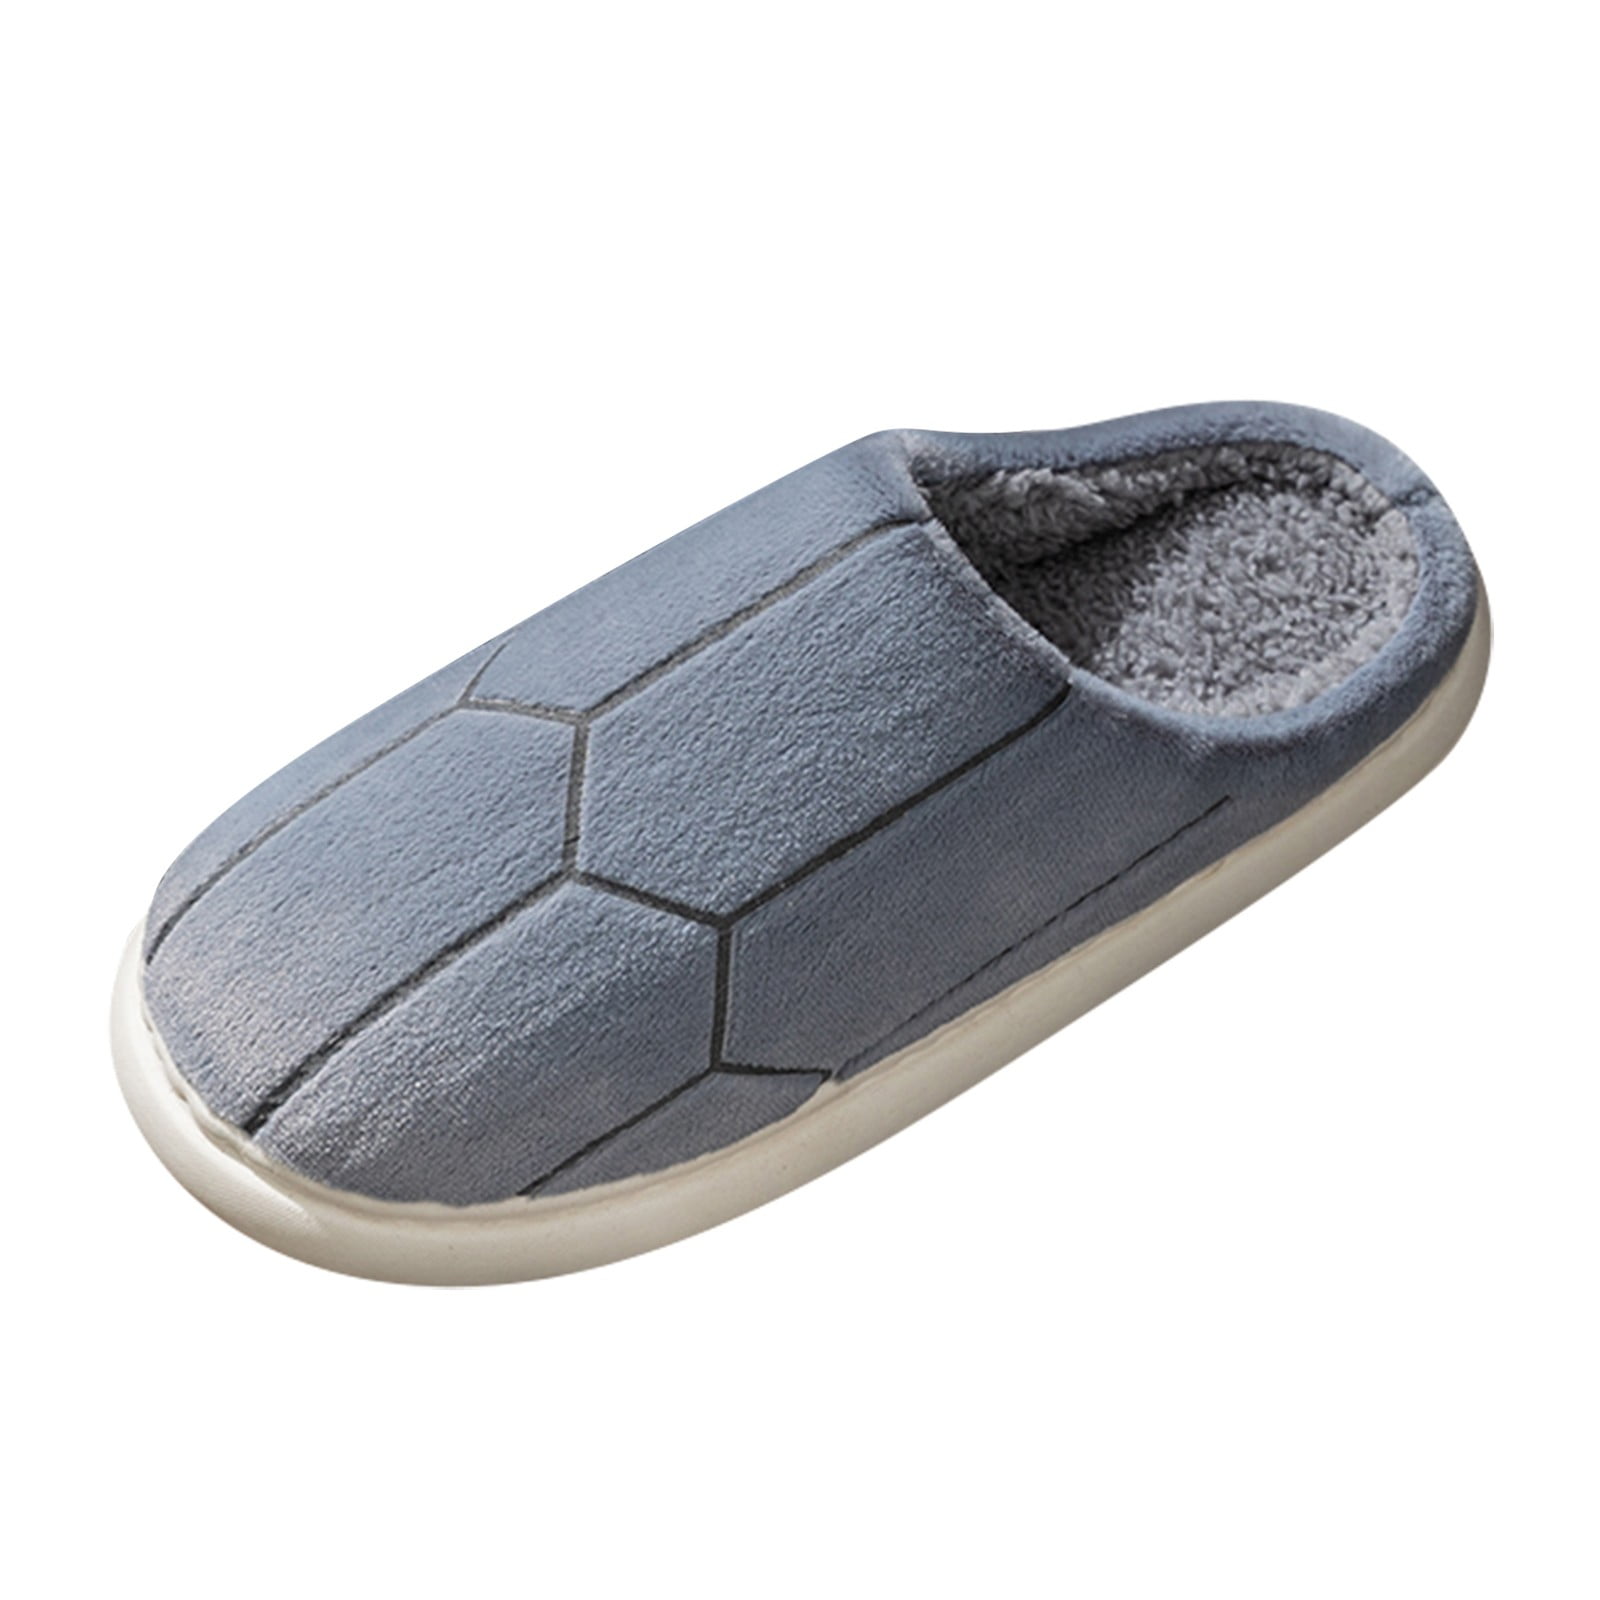 Vedolay Slippers for Men Soft Plush Cozy Indoor Outdoor Slippers Grey ...